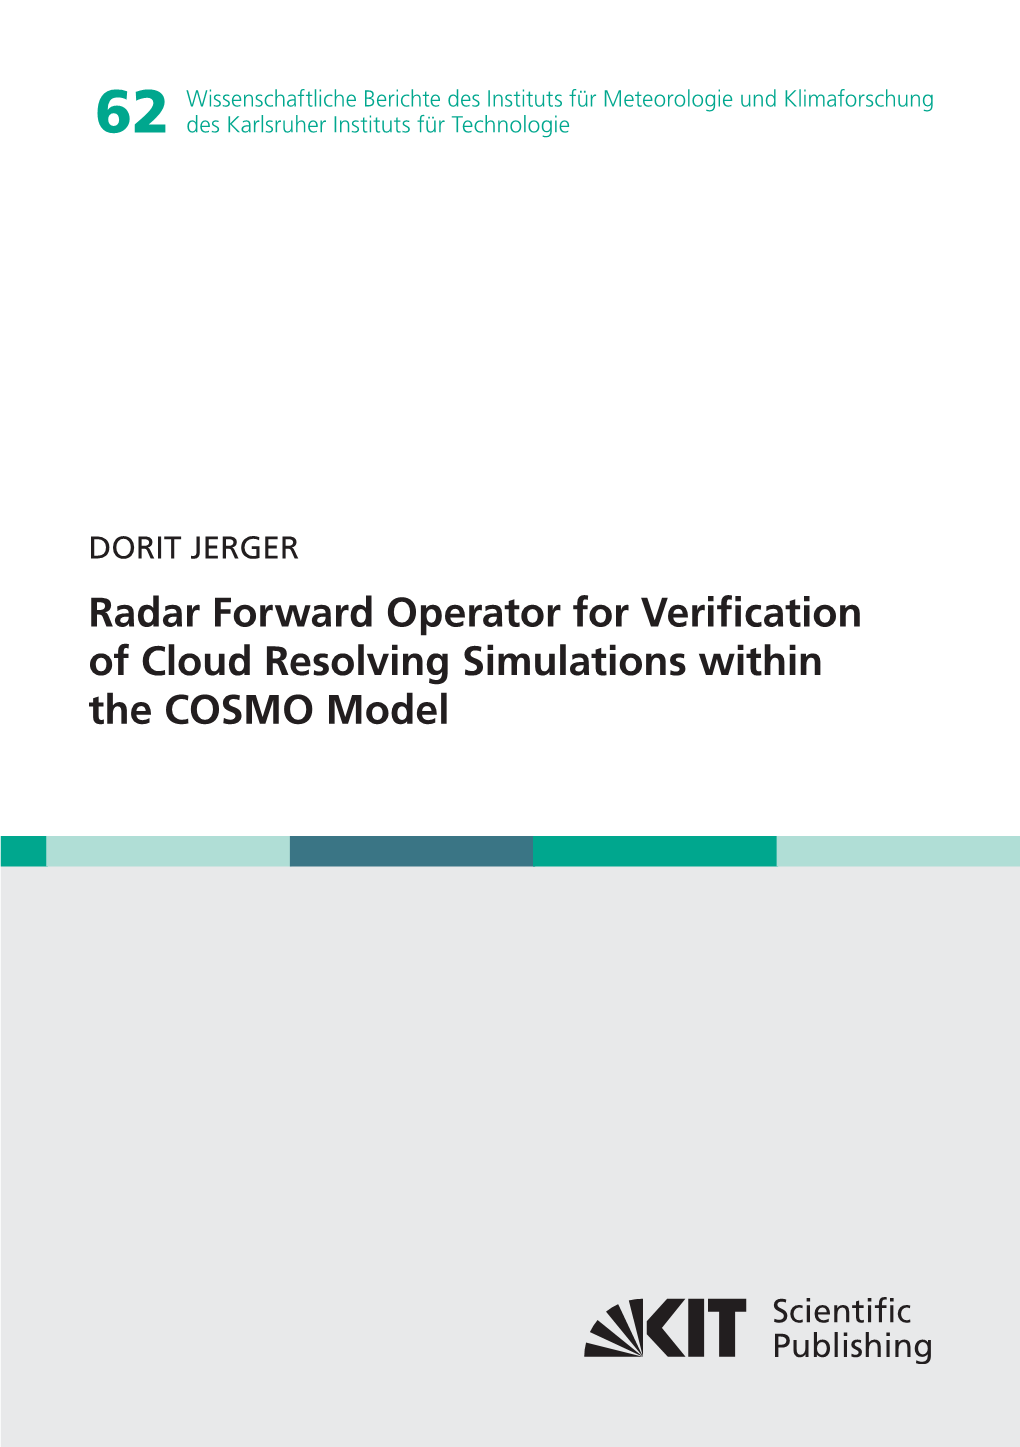 Radar Forward Operator for Verification of Cloud Resolving Simulations Within the COSMO Model Radar Forward Operator for Model Verification DORIT JERGER